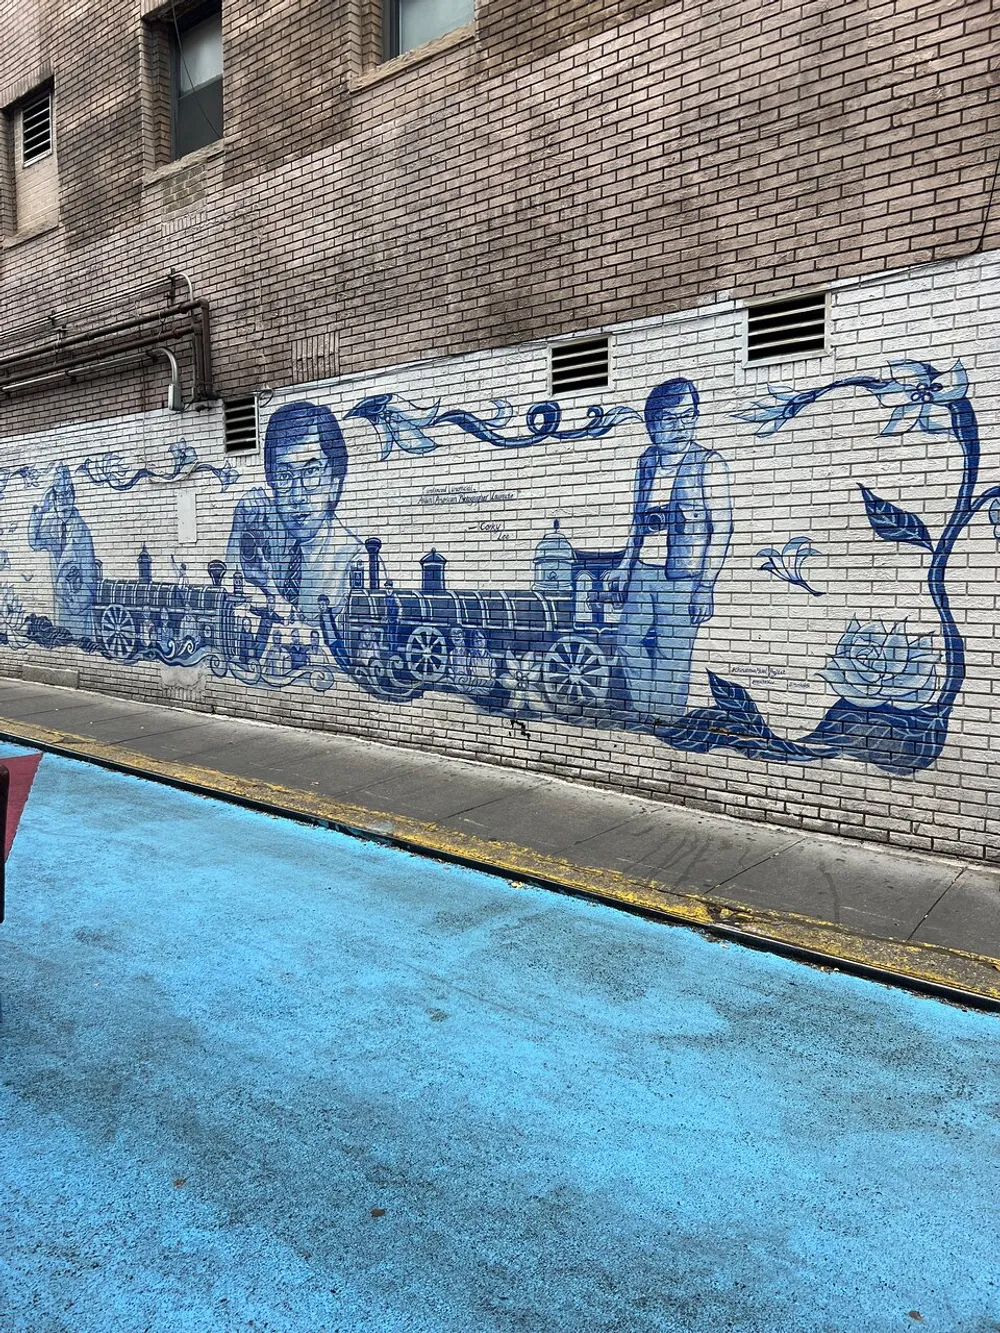 The image shows a detailed blue and white mural on a brick wall depicting individuals and a locomotive complemented by a similarly colored pavement